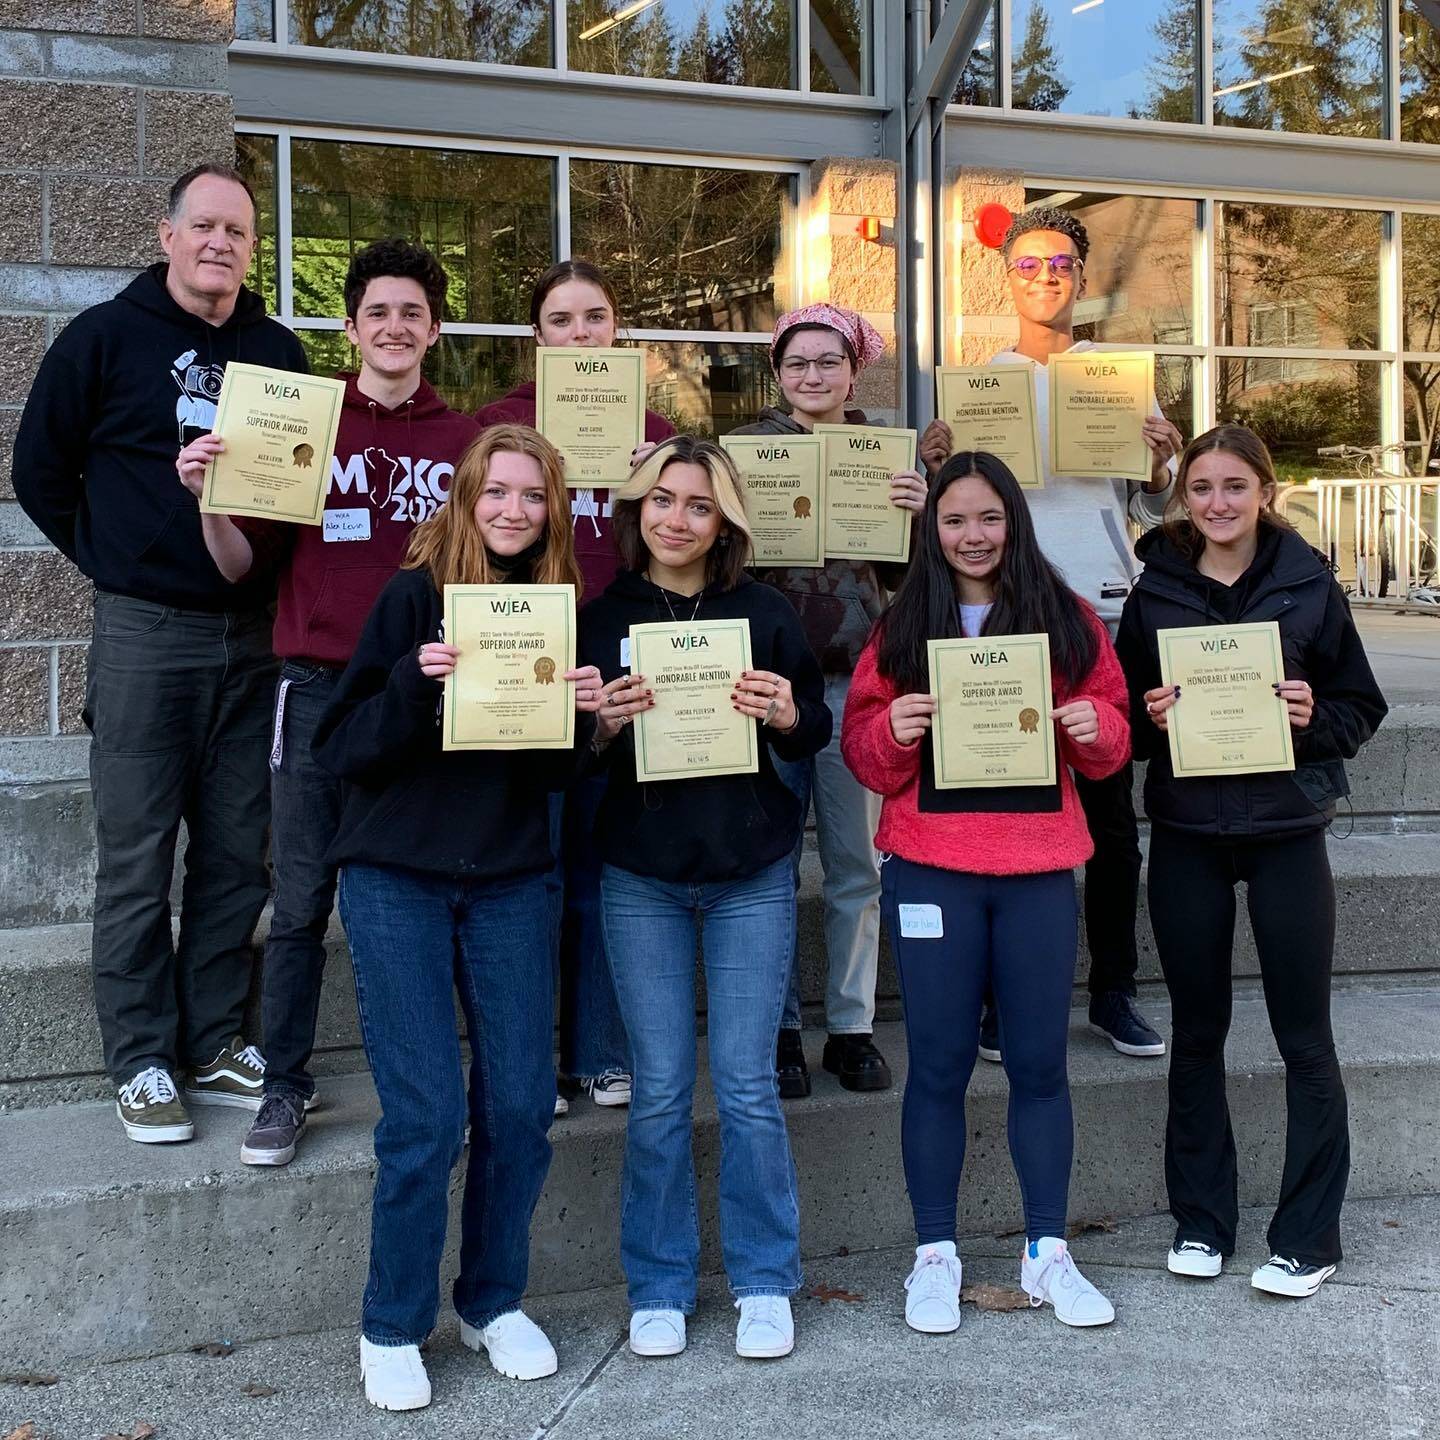 A host of Mercer Island High School (MIHS) journalists garnered awards at the Washington Journalism Education Association 2022 spring conference on March 5 at MIHS. Pictured are top row, left to right: Chris Twombley (English and journalism teacher), Alex Levin (Superior: Newswriting, State Journalist of the Year), Kate Grove (Excellent: Editorial Writing), Lena Hardisty (Superior: Editorial Cartooning) and Brooks Kahsai (Honorable Mention: Sports Action Photography). Bottom row, left to right: Max Hense (Superior: Review Writing), Sandra Pederson (Honorable Mention: Newspaper Feature Writing), Jordan Balousek (Superior: Headline Writing and Copy Editing) and Honor Warburg. Not pictured: Asha Woerner (Honorable Mention: Sports Feature Writing), Sam Pelter (Honorable Mention: Newspaper Feature Photo), Piper Pokorny (Excellent: Yearbook Sports Photo) and Mischa Gregory (Honorable Mention: Yearbook Feature Photo). MIHS also received, Excellent: News Website. Photo courtesy of the Mercer Island School District